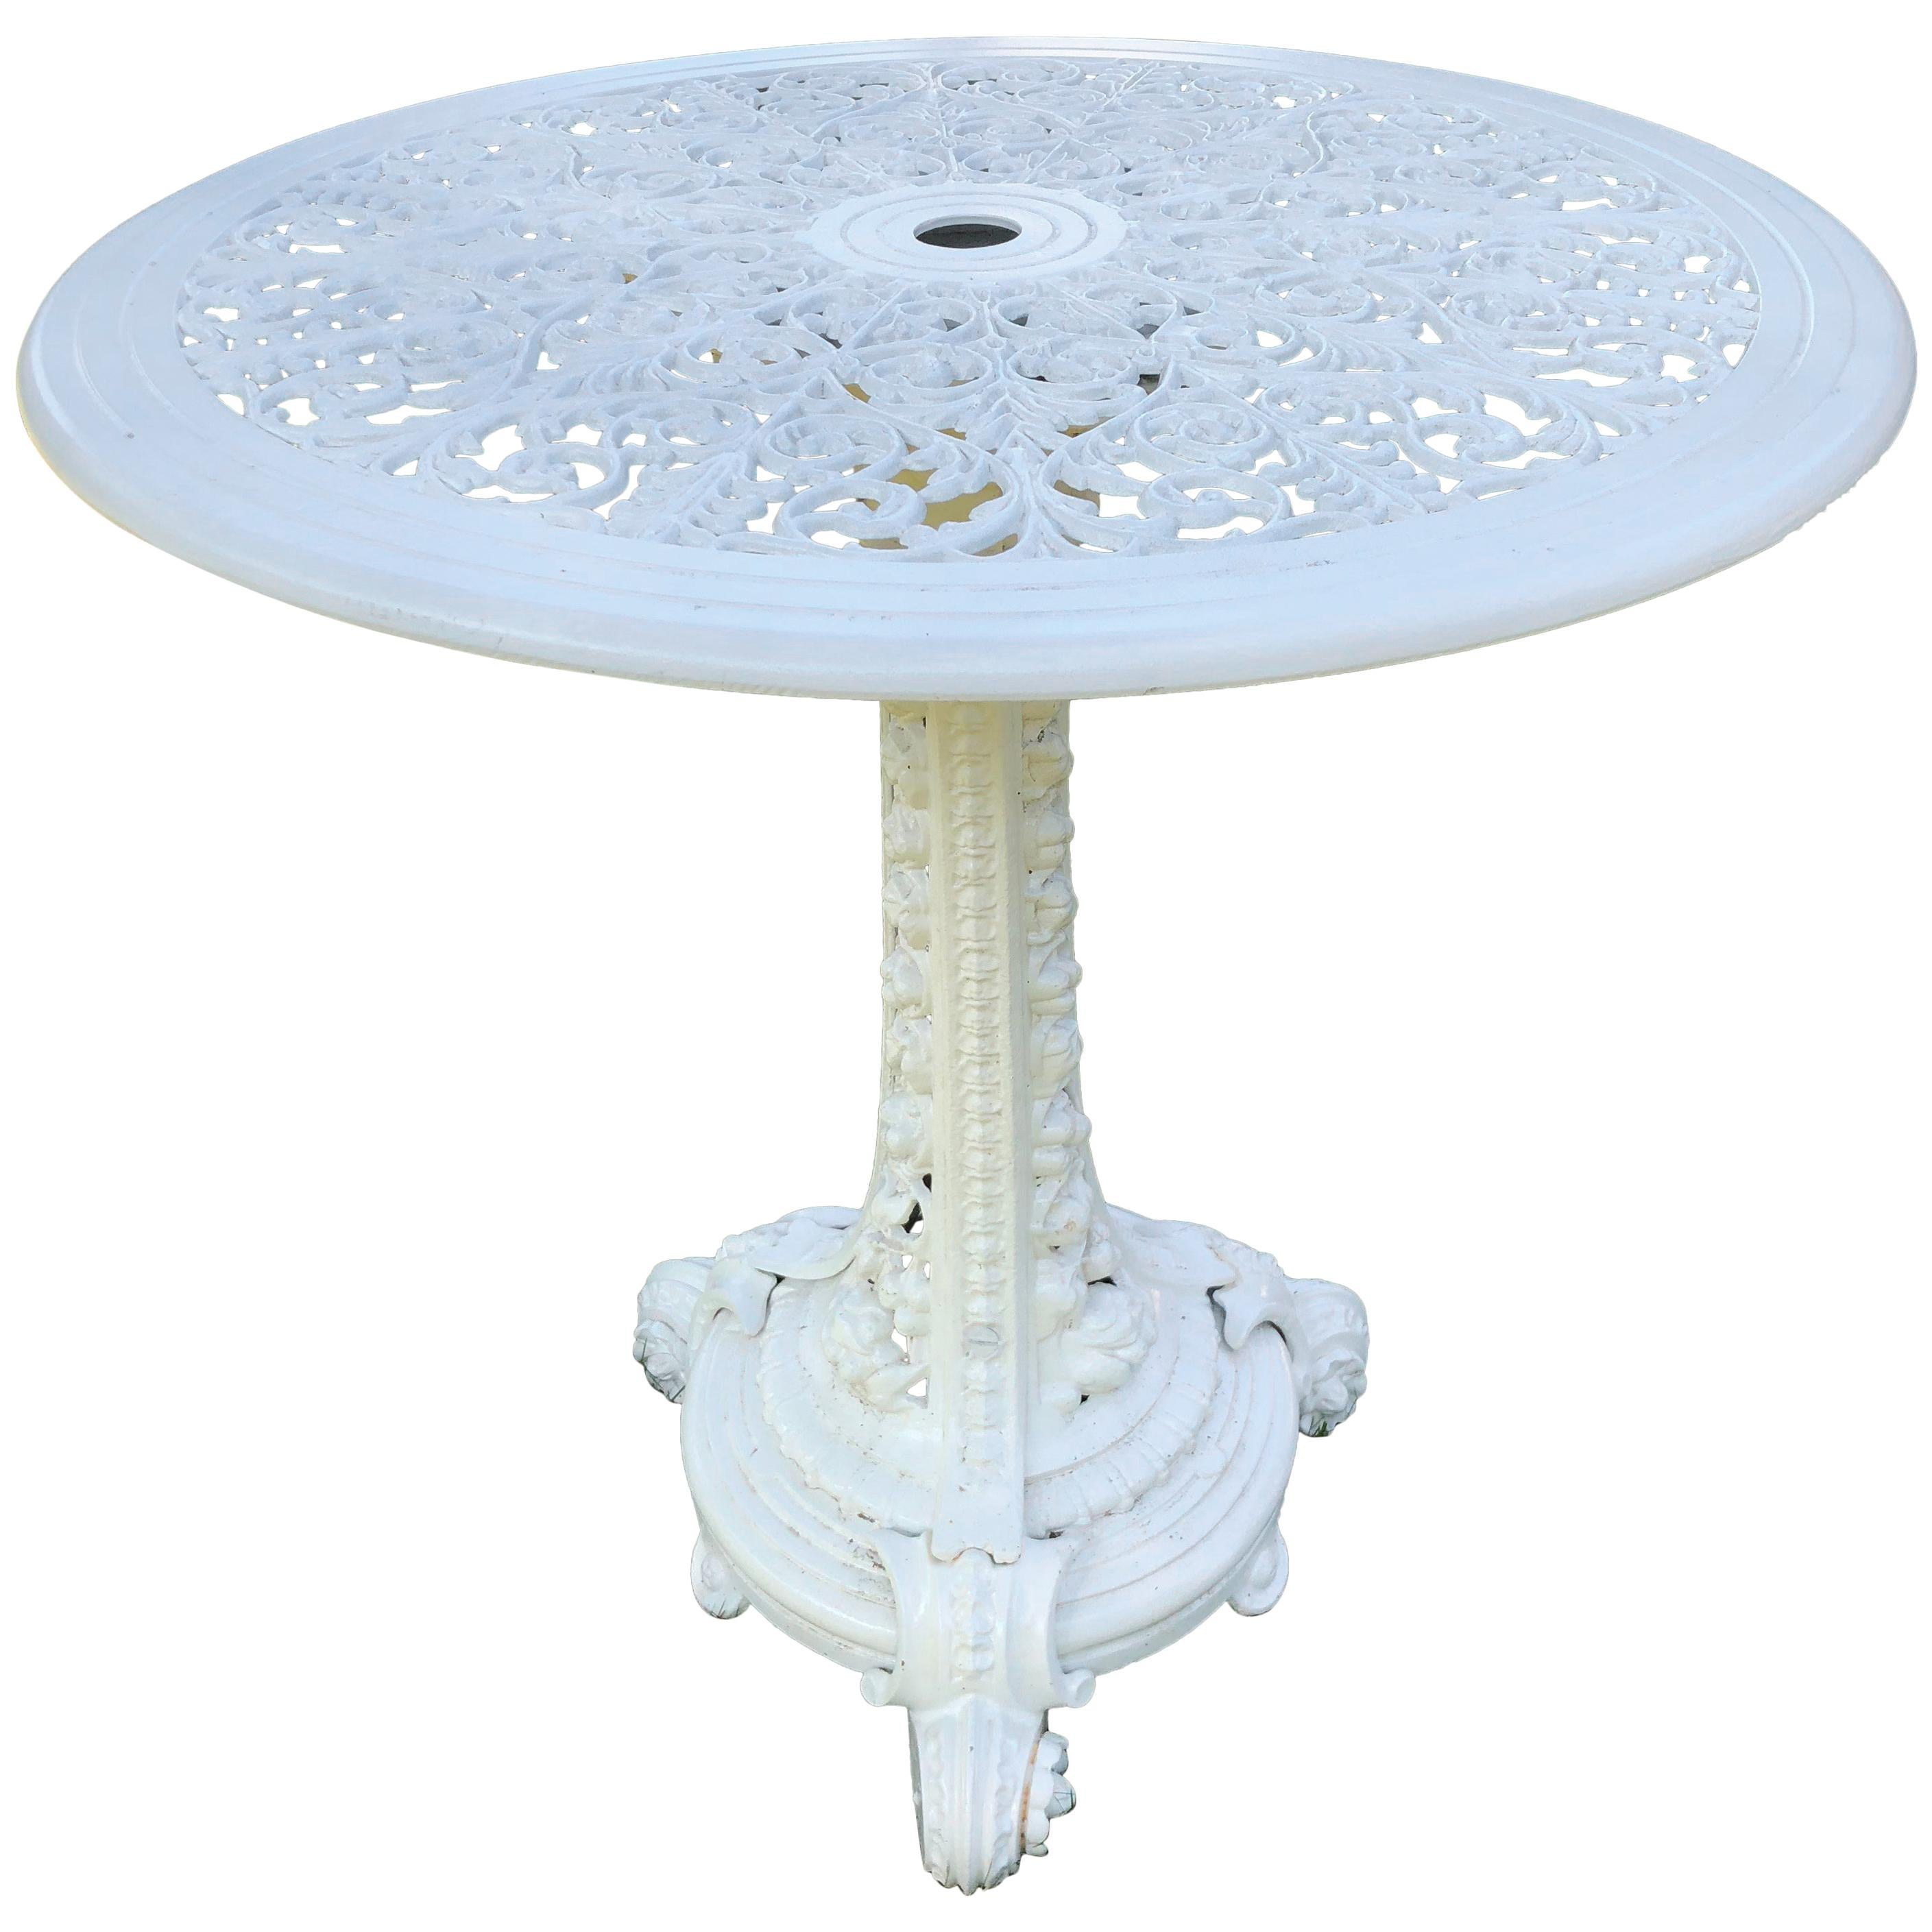 Round 19th C Coalbrookdale Cast Iron Table Base with Replaced Aluminum Top